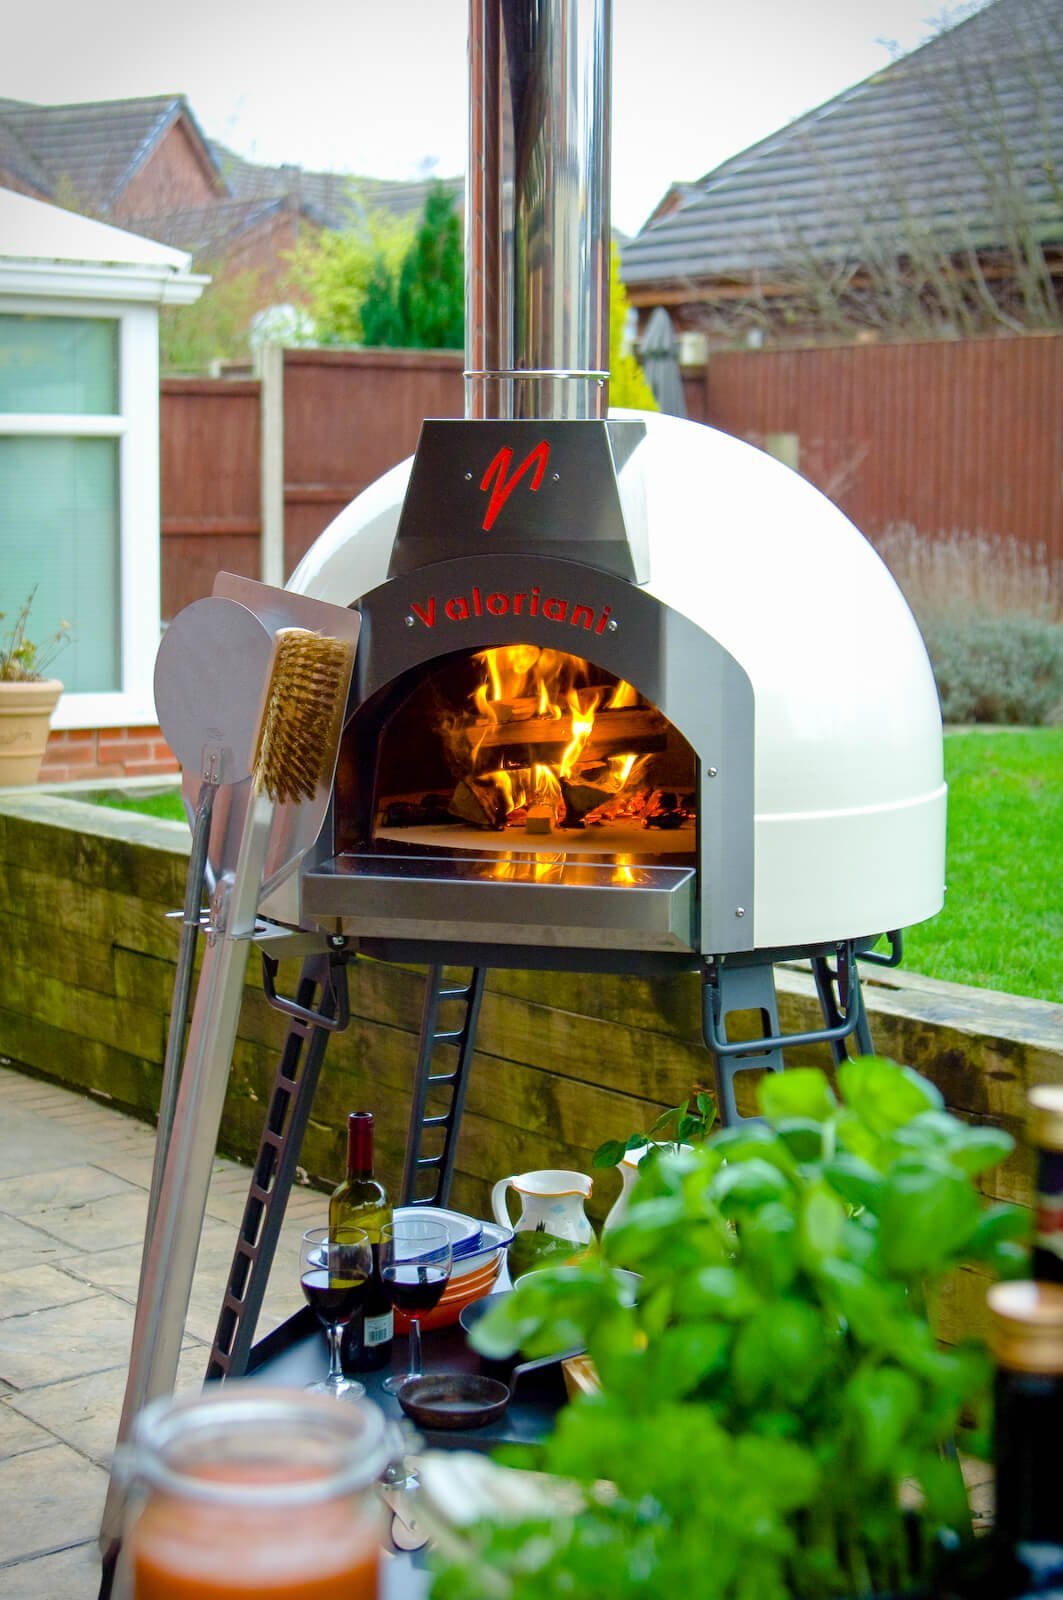 Valoriani Baby: pizza oven with gas firing and 60cm diameter, incl. 1. base, red